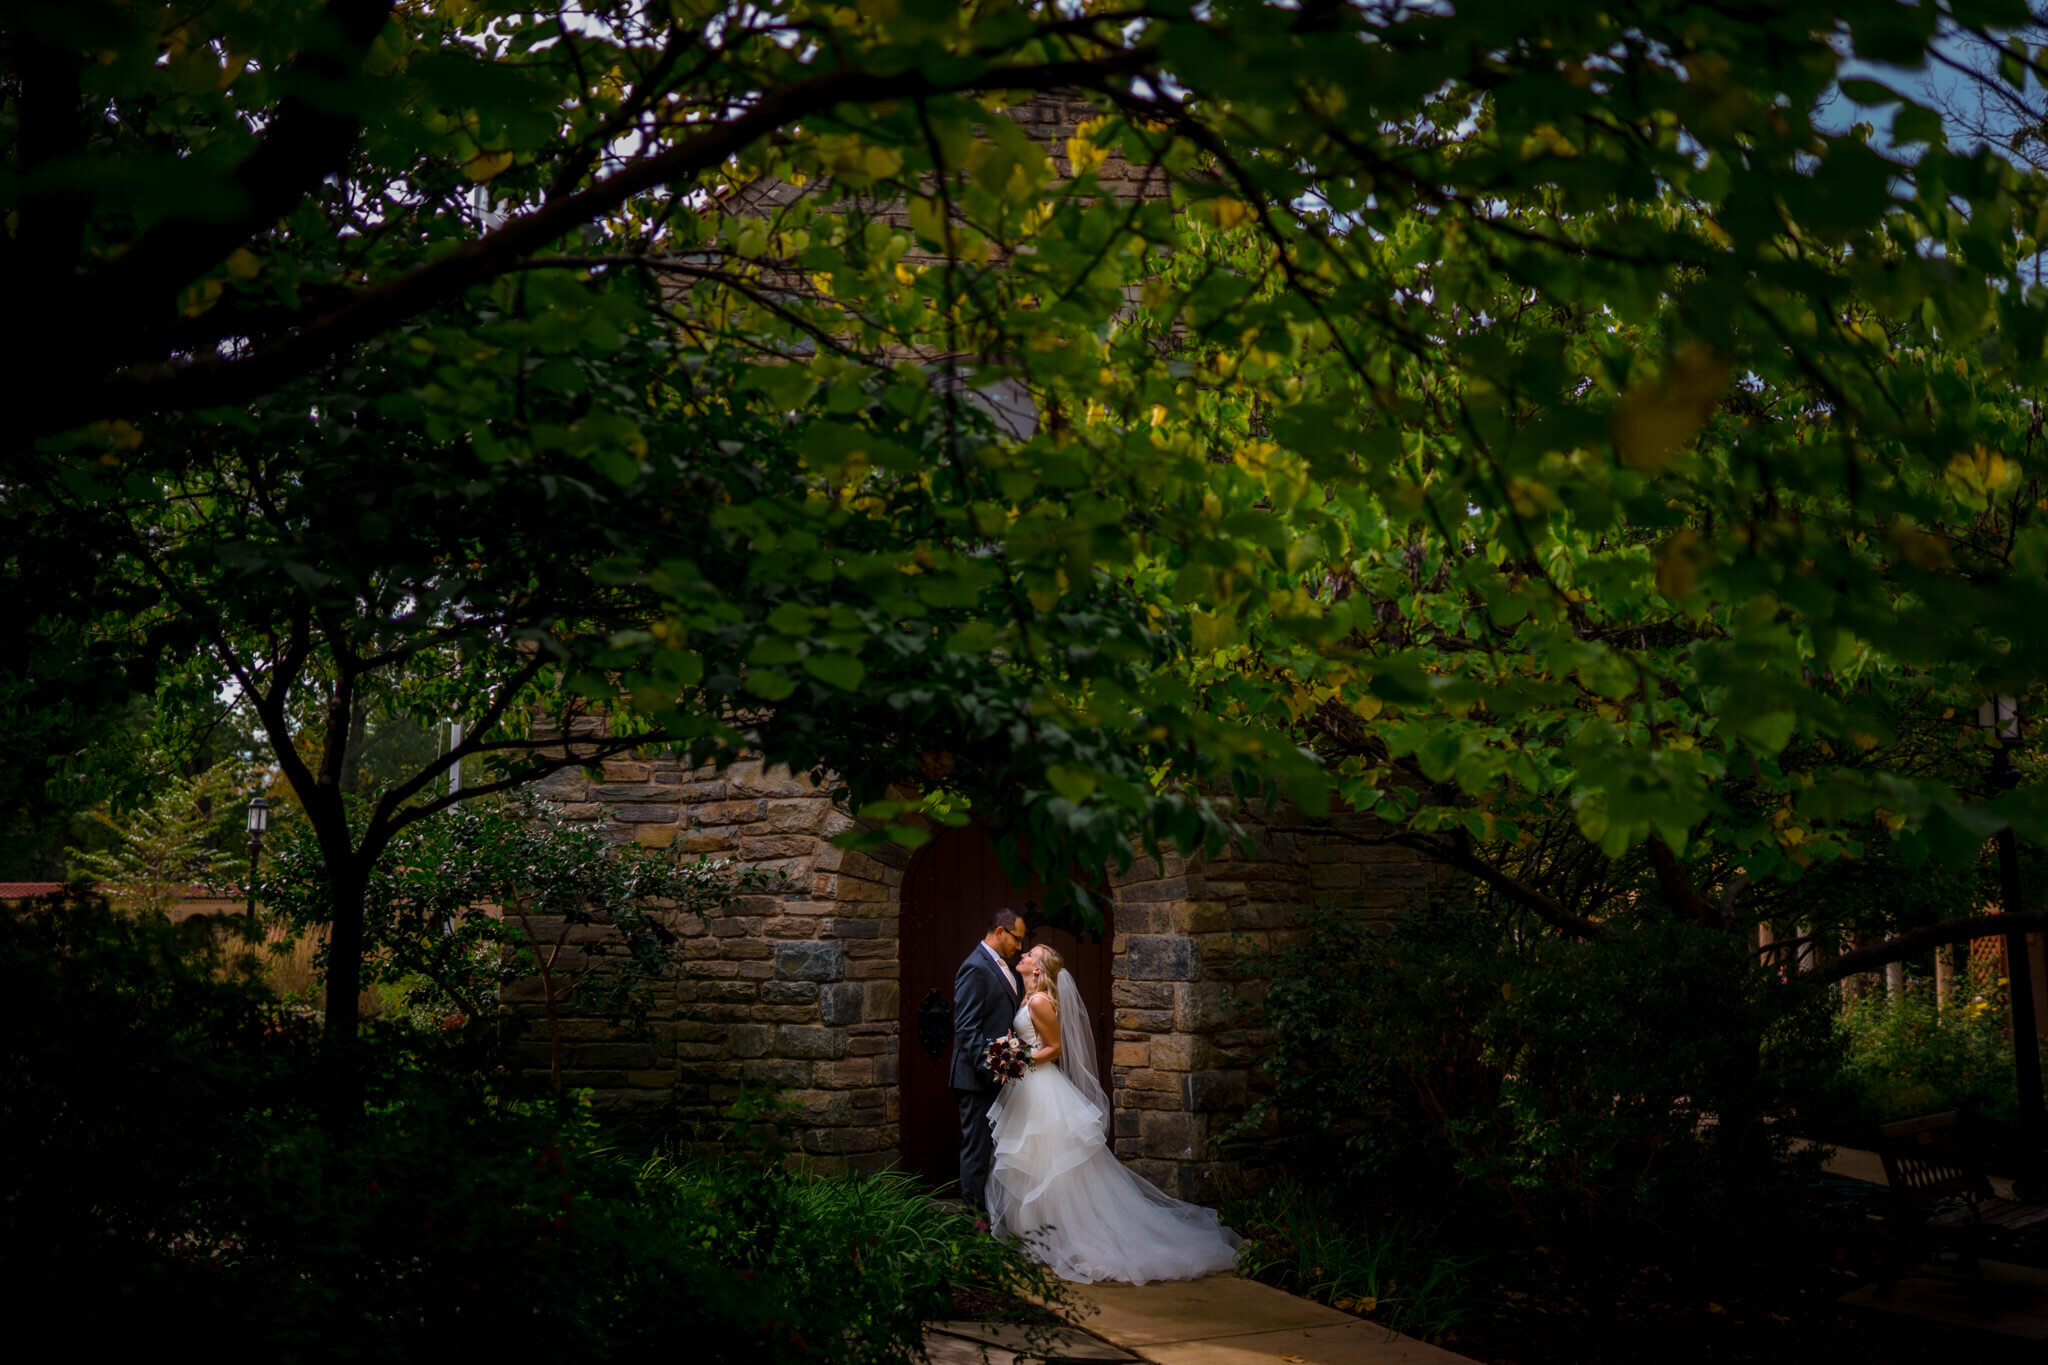 01-Washington-DC-Mini-Wedding-St-Francis-Hall-Franciscan-Monastery-First-Look-Photography-by-Bee-Two-Sweet-122.jpg